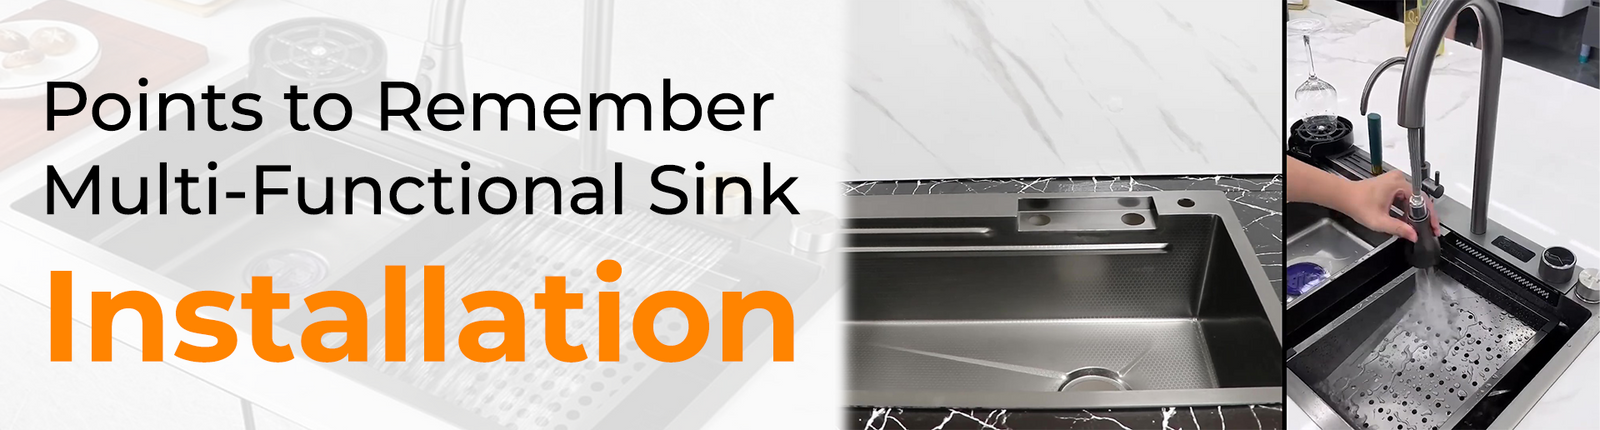 Points to Remember for Multi-Functional Sink Installation